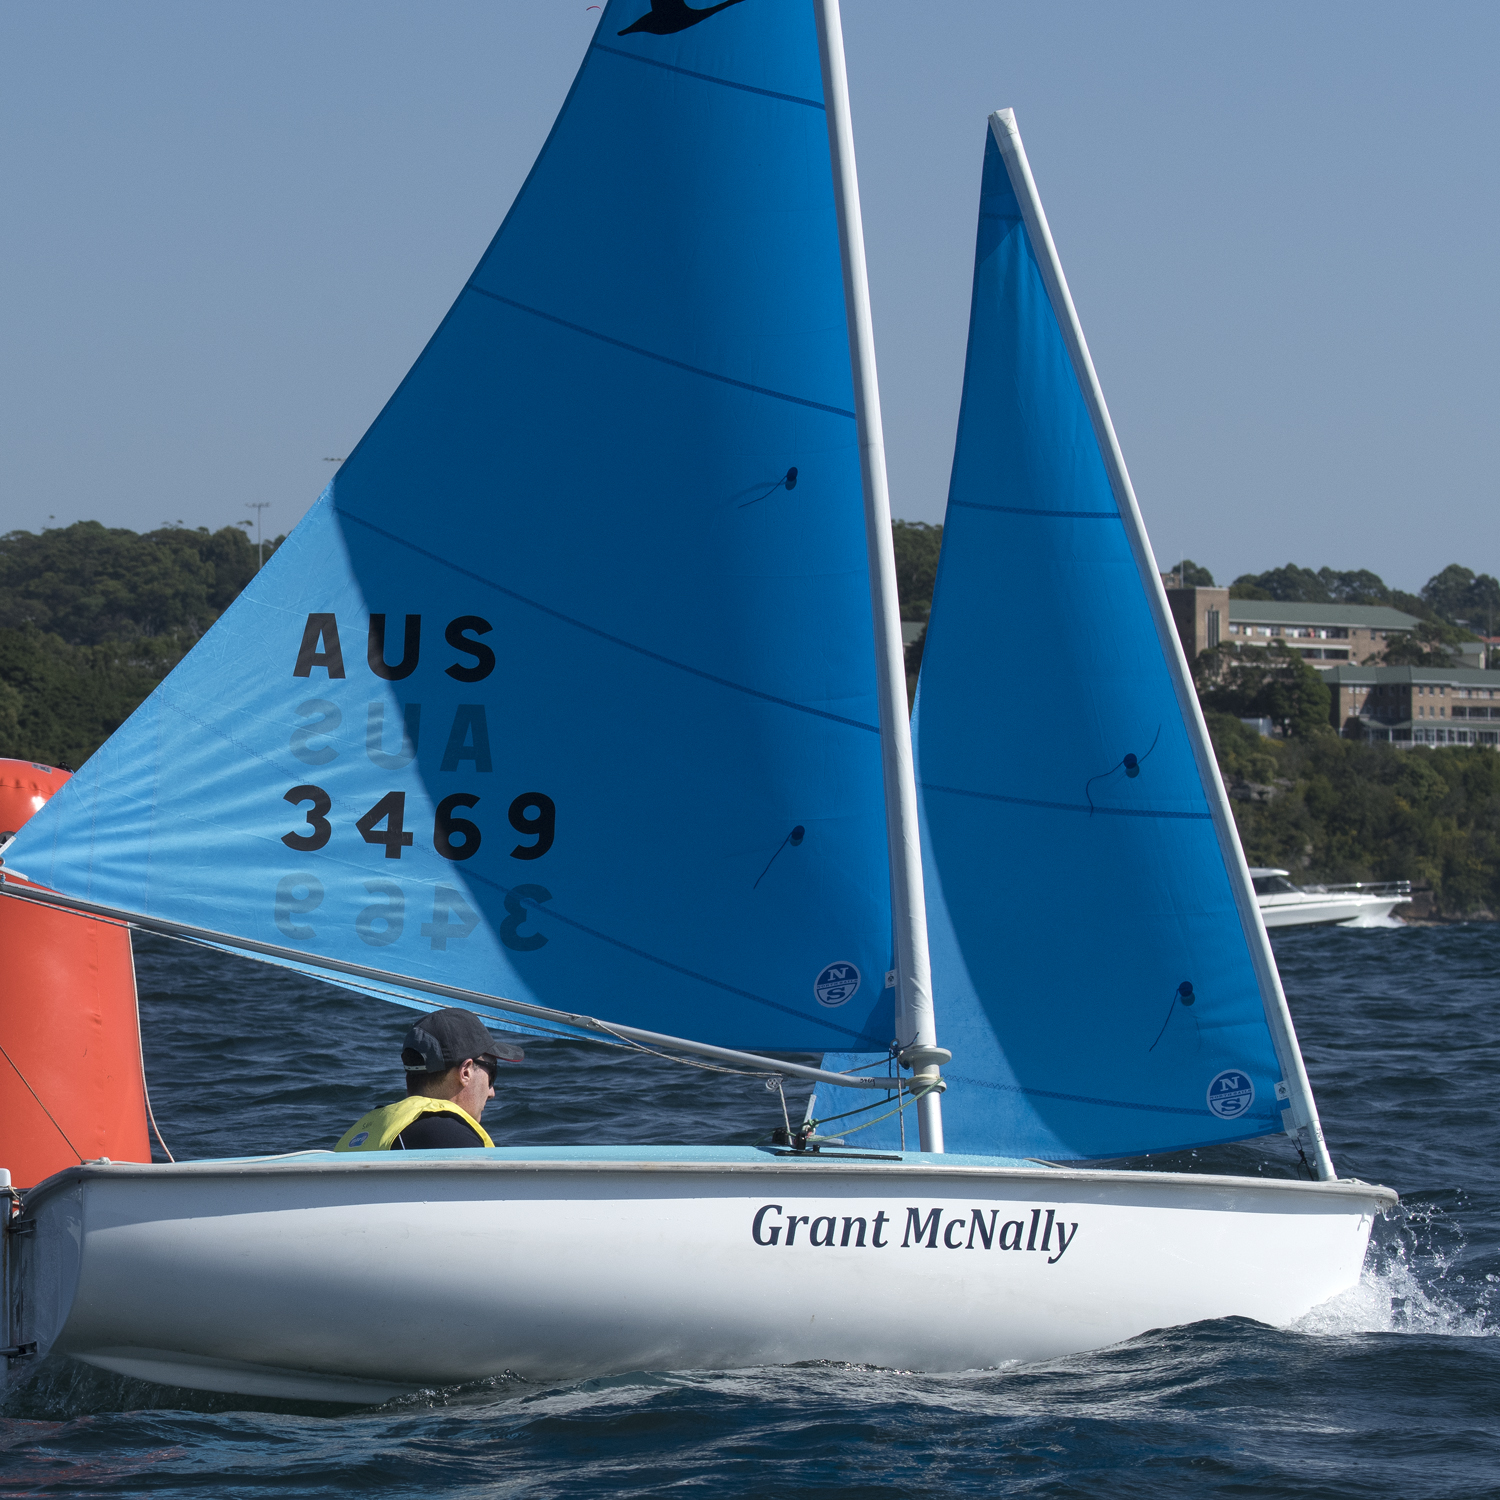 Gareth sailing one of Middle Harbour Sailability Hansa boats. This boat was donated by the family of Grant McNally who is one of our regular sailors.
Photo by Marg. Find her on Facebook at Marg’s Yacht Photos